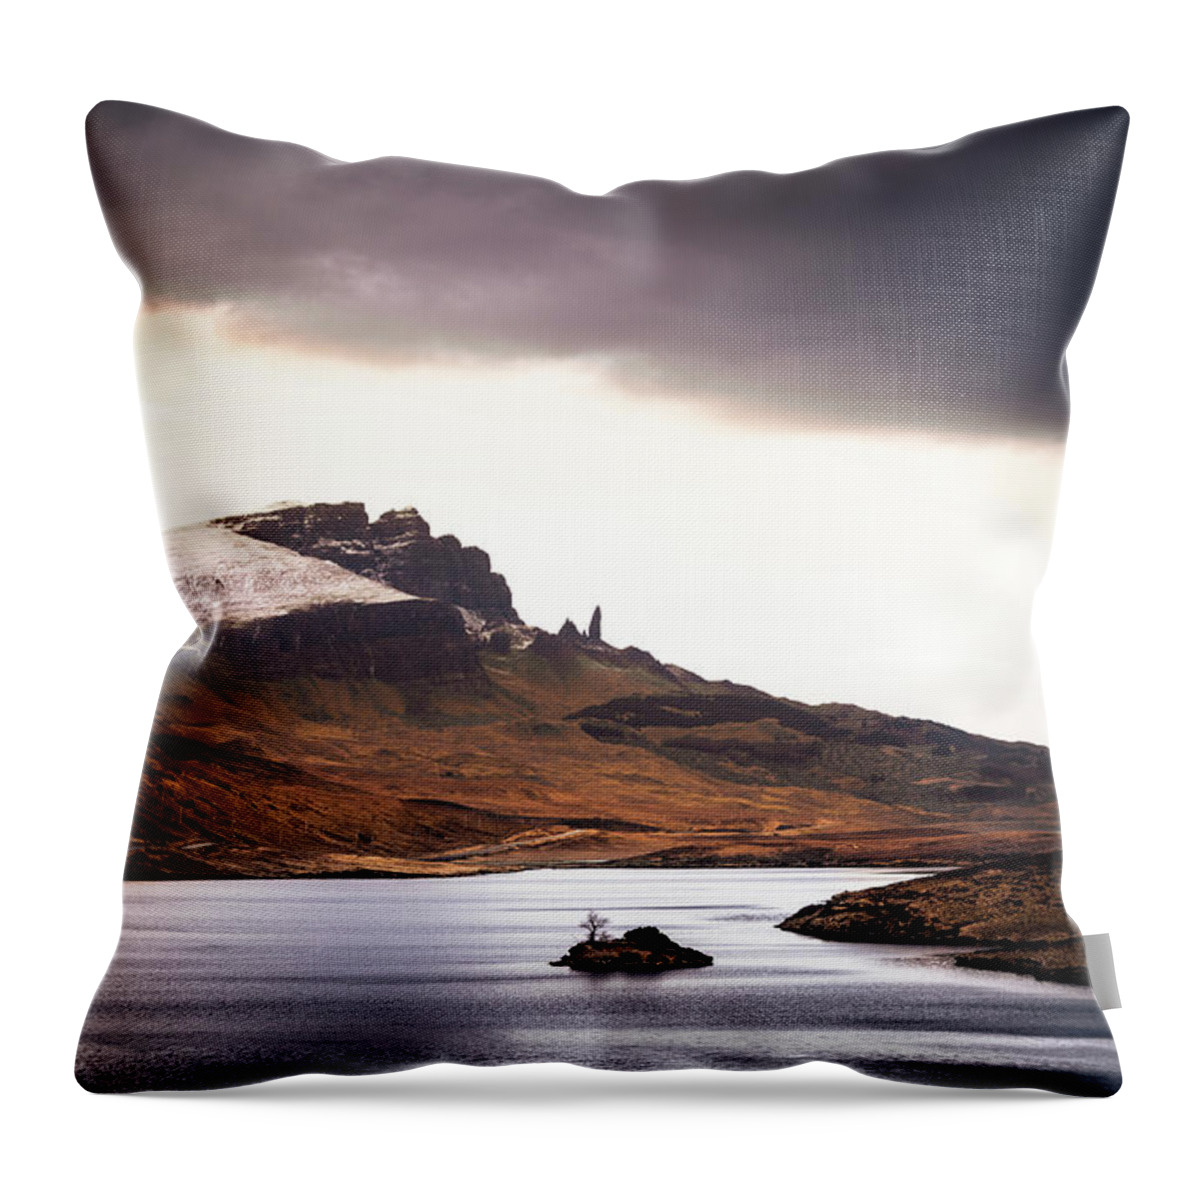 Water's Edge Throw Pillow featuring the photograph Wild Nature Landscape In Scotland, Isle by Zodebala